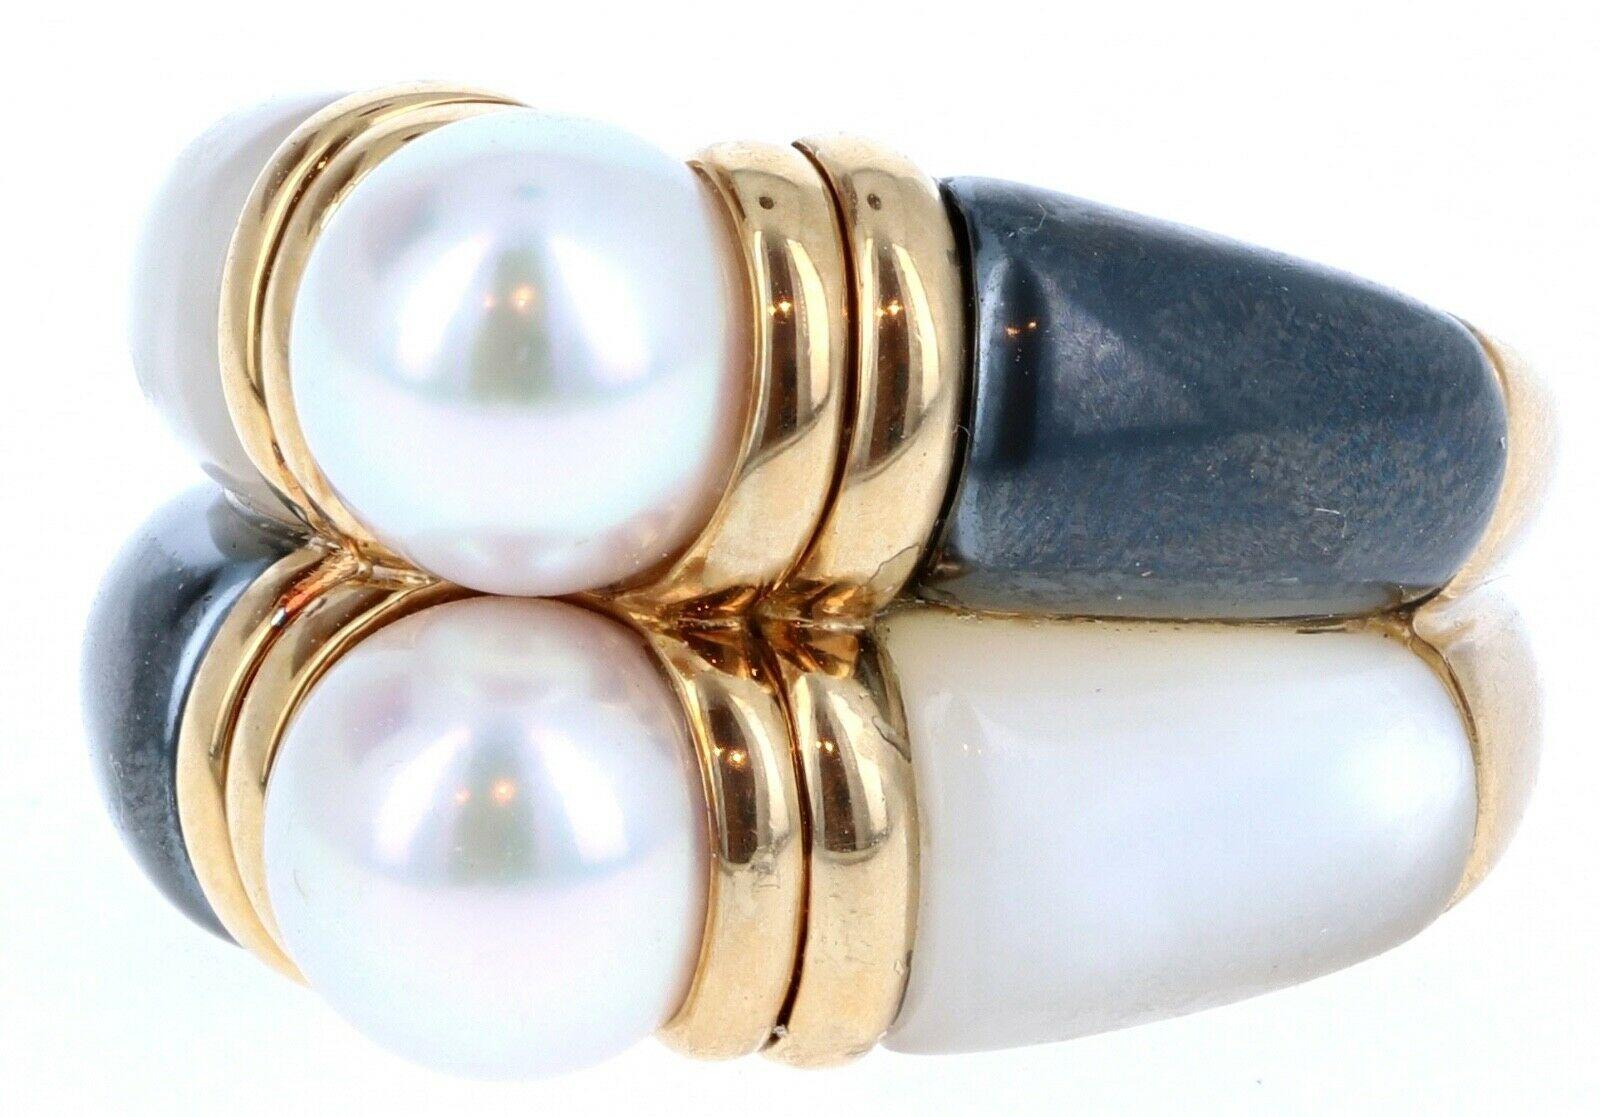 Bulgari Bvlgari 18k Yellow Gold, Pearl, Hematite & MOP Double Band Ring 11.9g 


For sale is this beautiful double band ring by Bulgari.
The ring is comprised of 2 pearls, hematite and mother of pearl. 
The ring is crafted in 18k yellow gold.